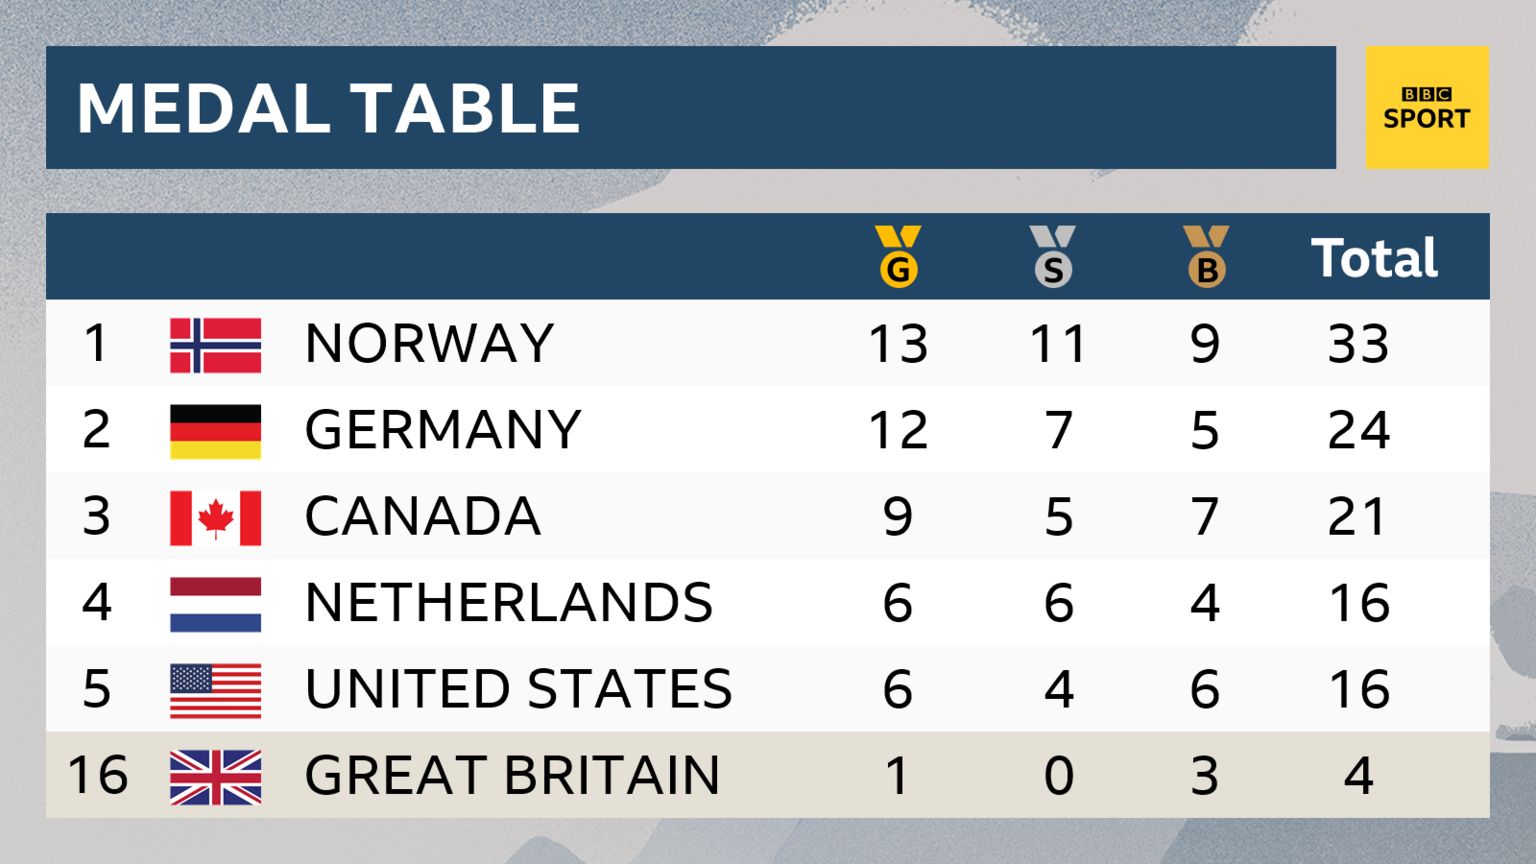 The Winter Olympics medal table on day 12 in Pyeongchang